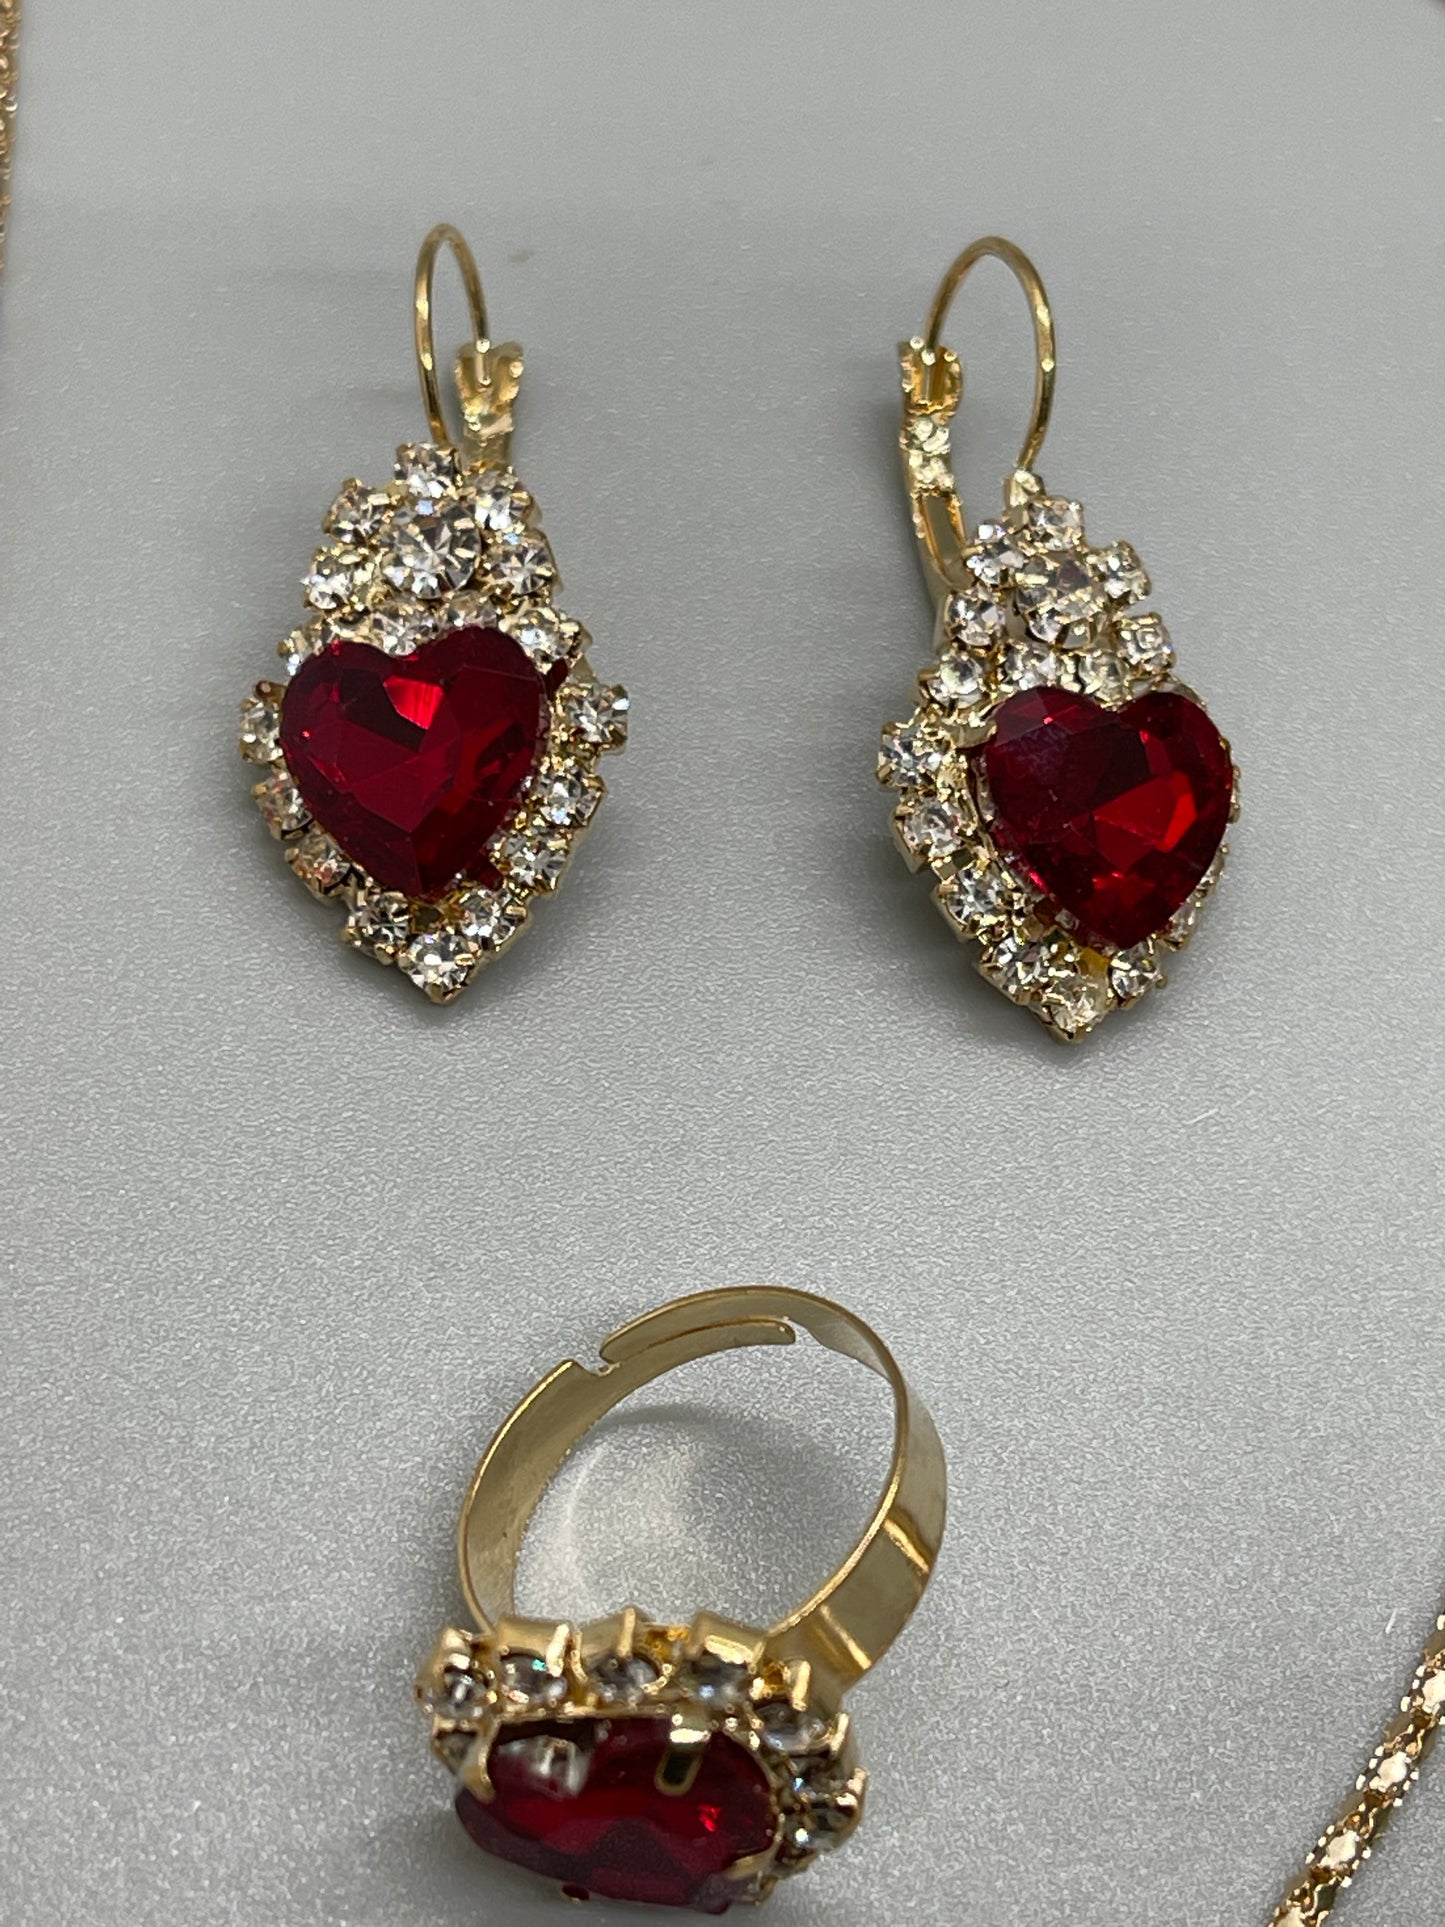 Red Crystal Jewelry Sets finger ring earring necklace Zinc Alloy Crystal Heart 3 pieces